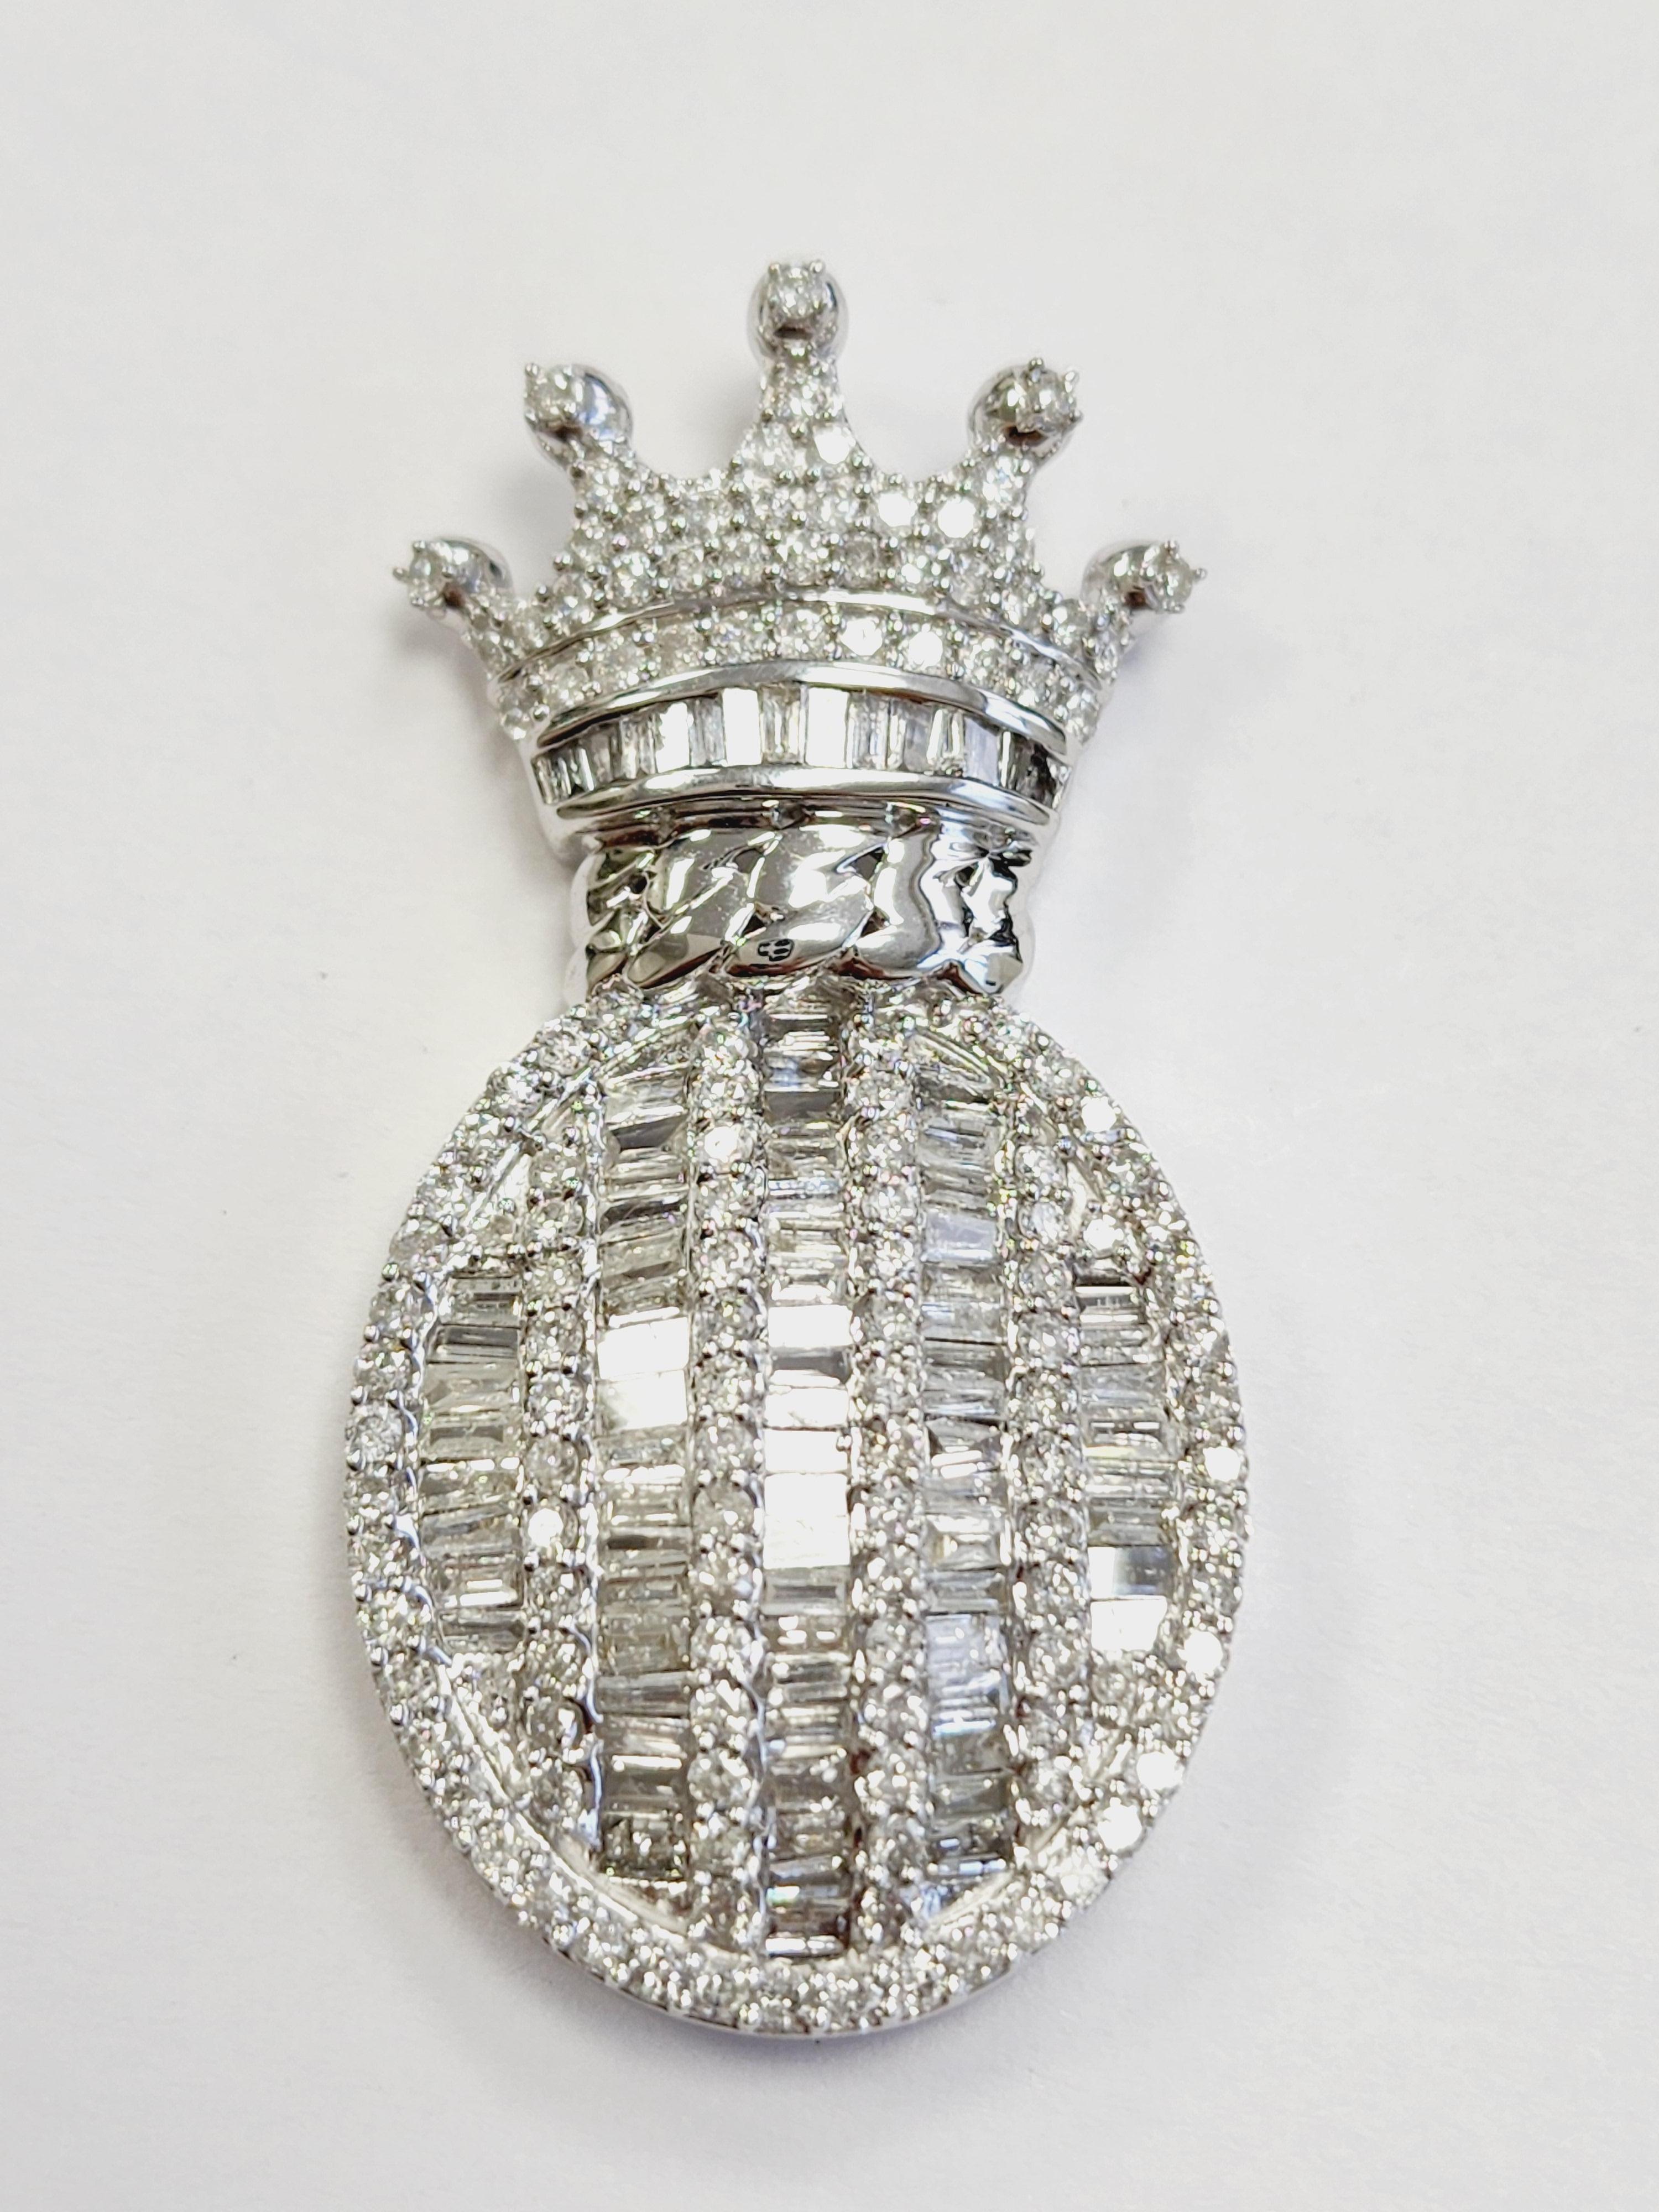 Beautiful shiny, 2 cttw Pineapple Shape Pendant 14 Karat White Gold. average Color H-I, Clarity SI-I.
Channel Set of Baguettes and Round Natural Diamonds. (Pendant Only)
Measurement 1.50 inch long x 0.75 inch wide x 0.25 inch height